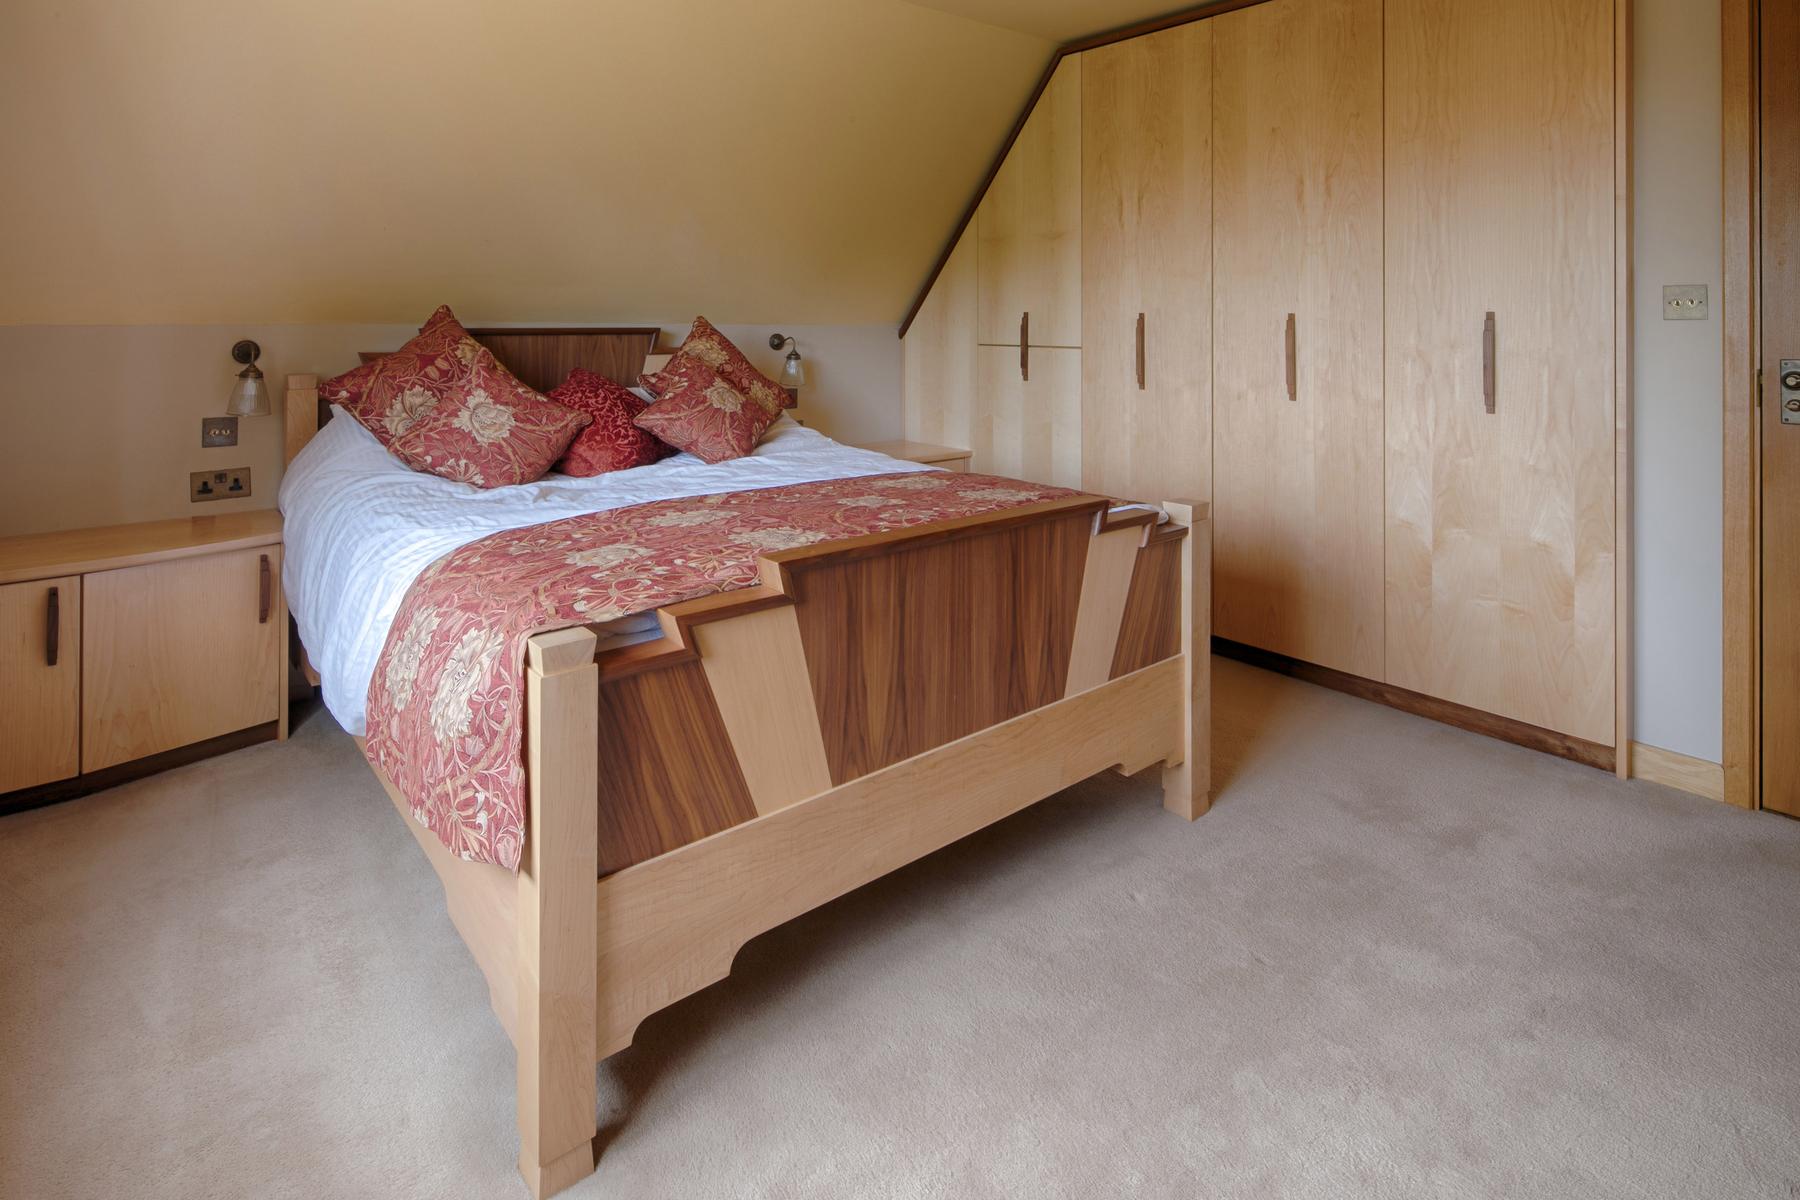 Walnut & maple fitted bedroom